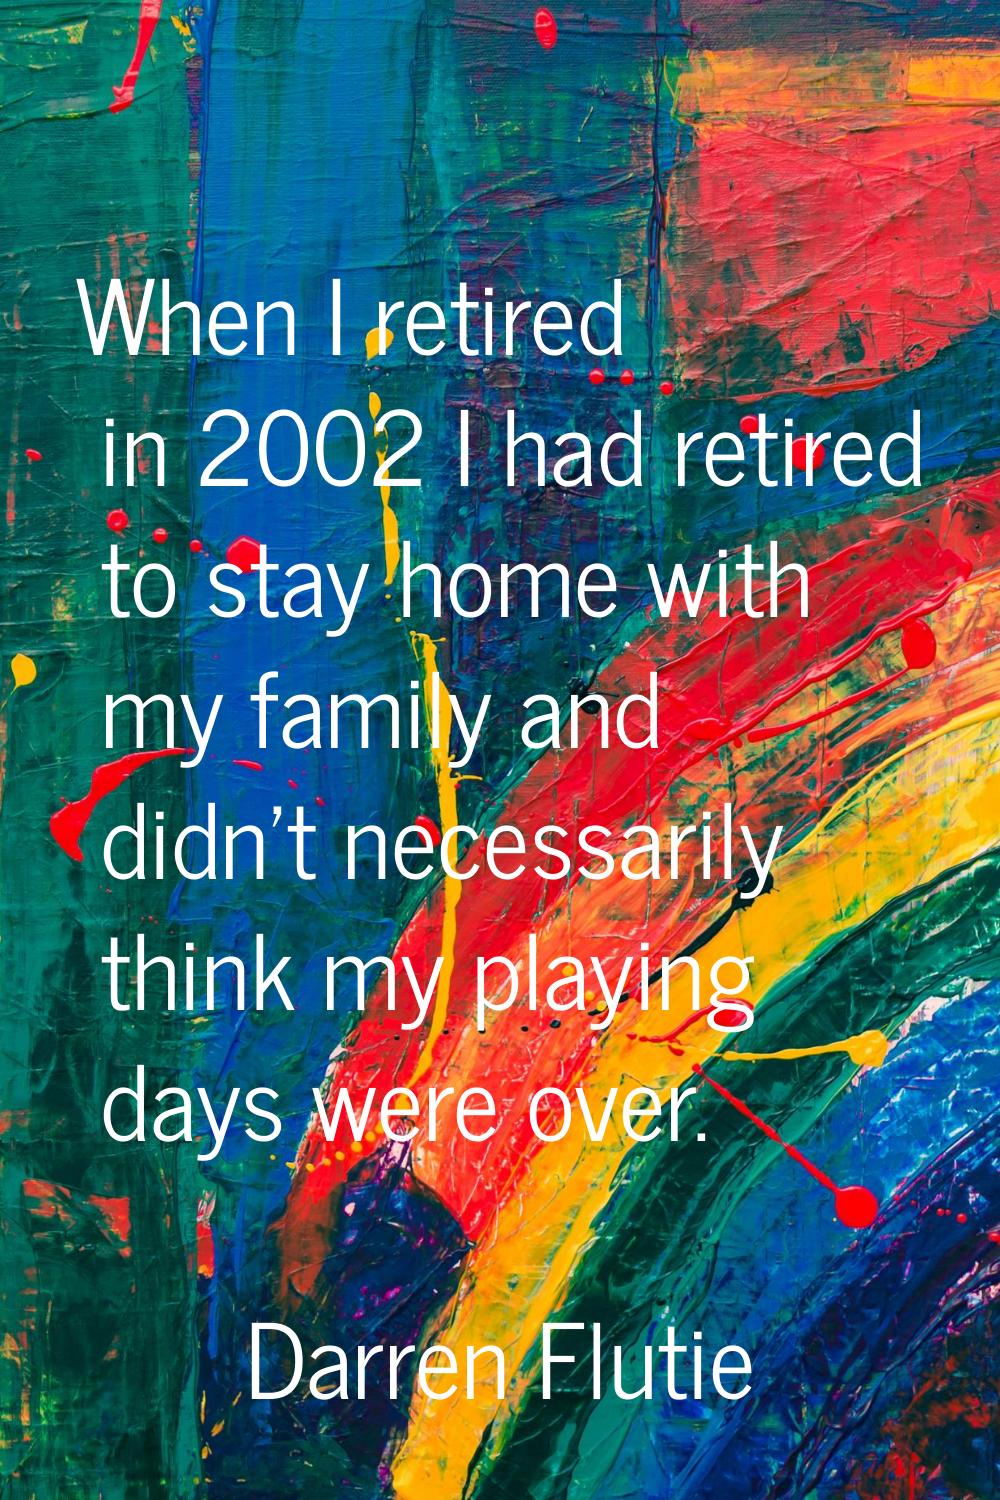 When I retired in 2002 I had retired to stay home with my family and didn't necessarily think my pl